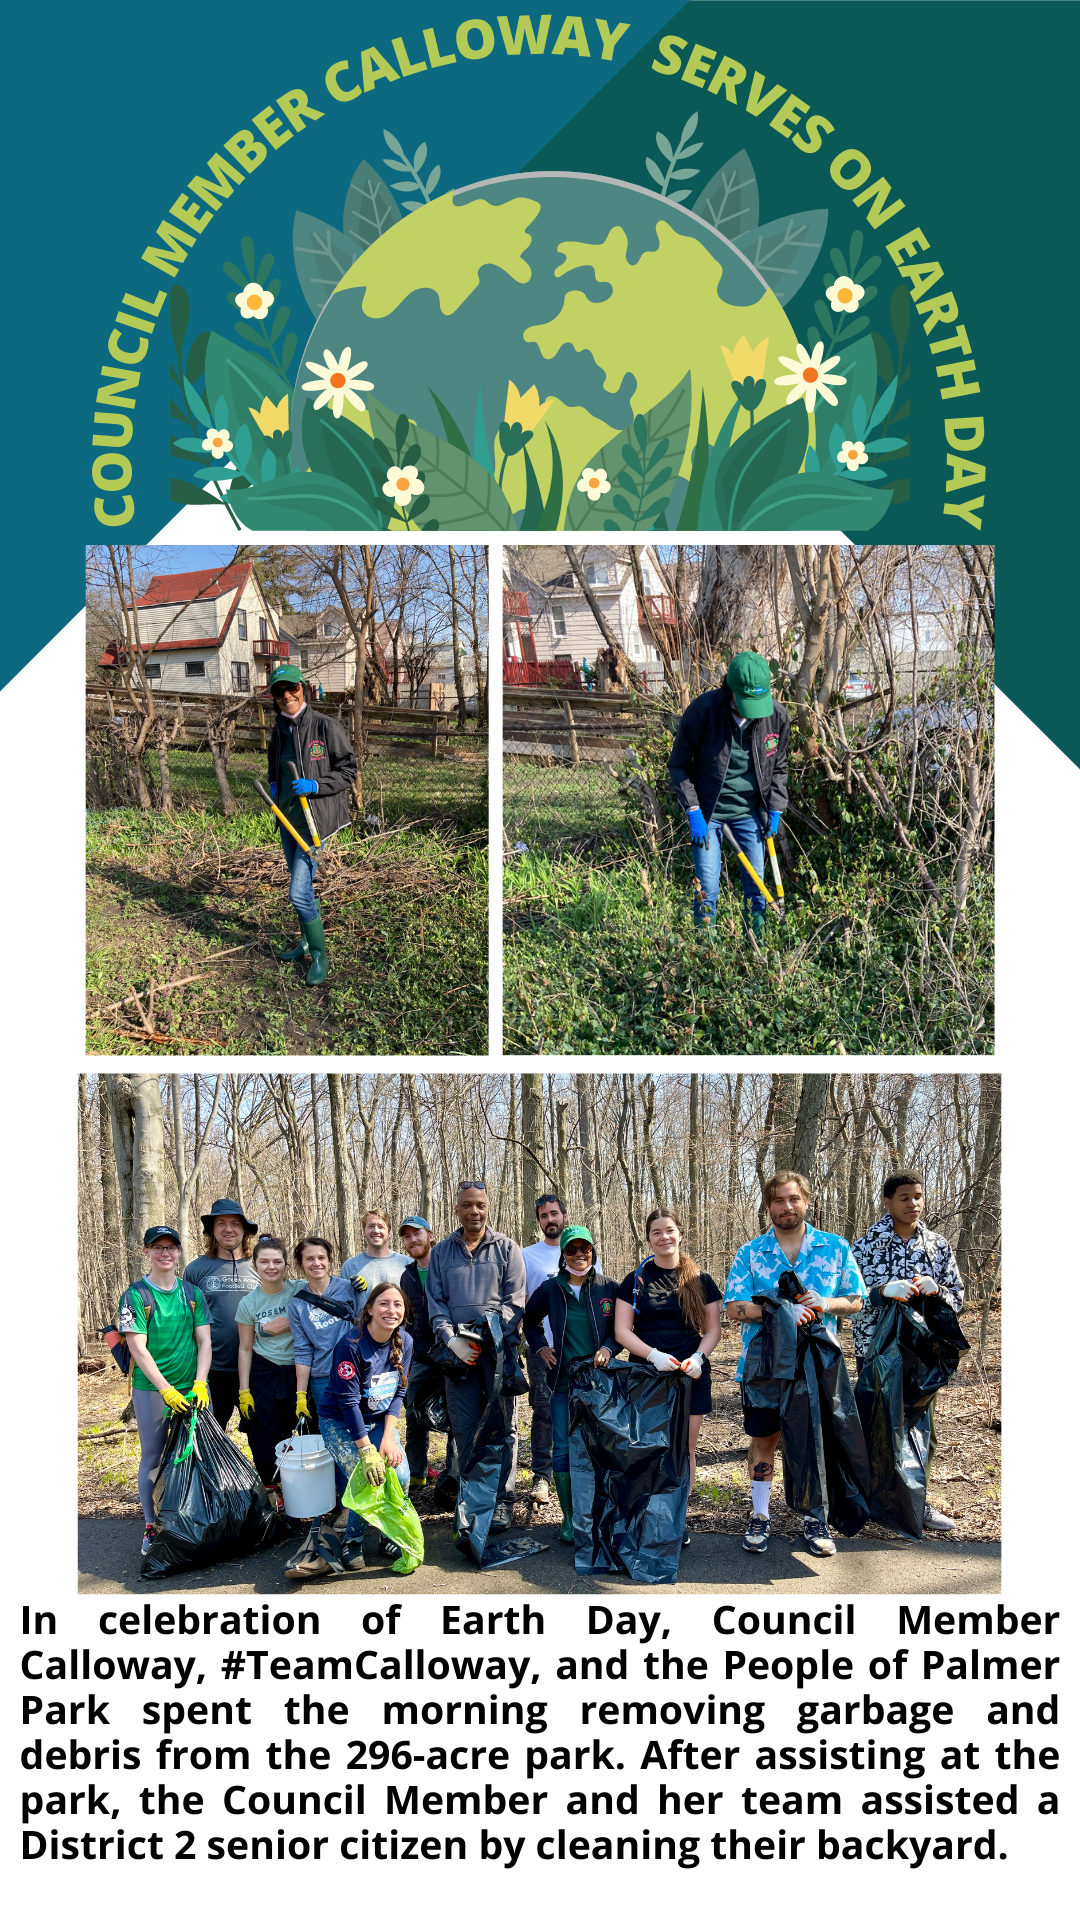 DAY OF SERVICE EARTH DAY